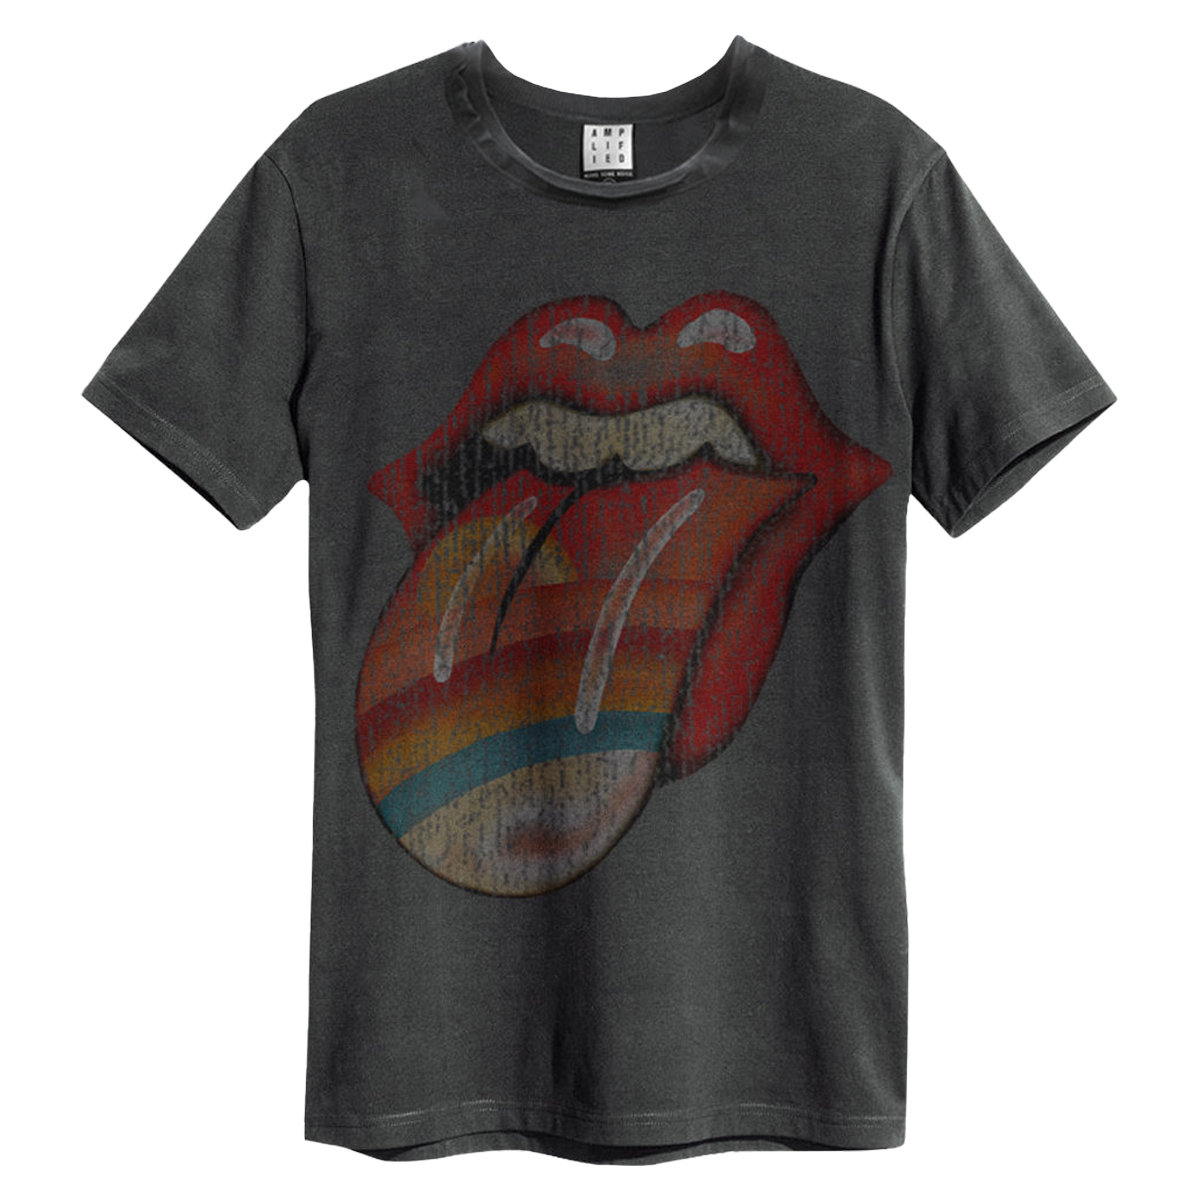 THE ROLLING STONES RAINBOW TONGUE (Don't publish, This style is not approved)